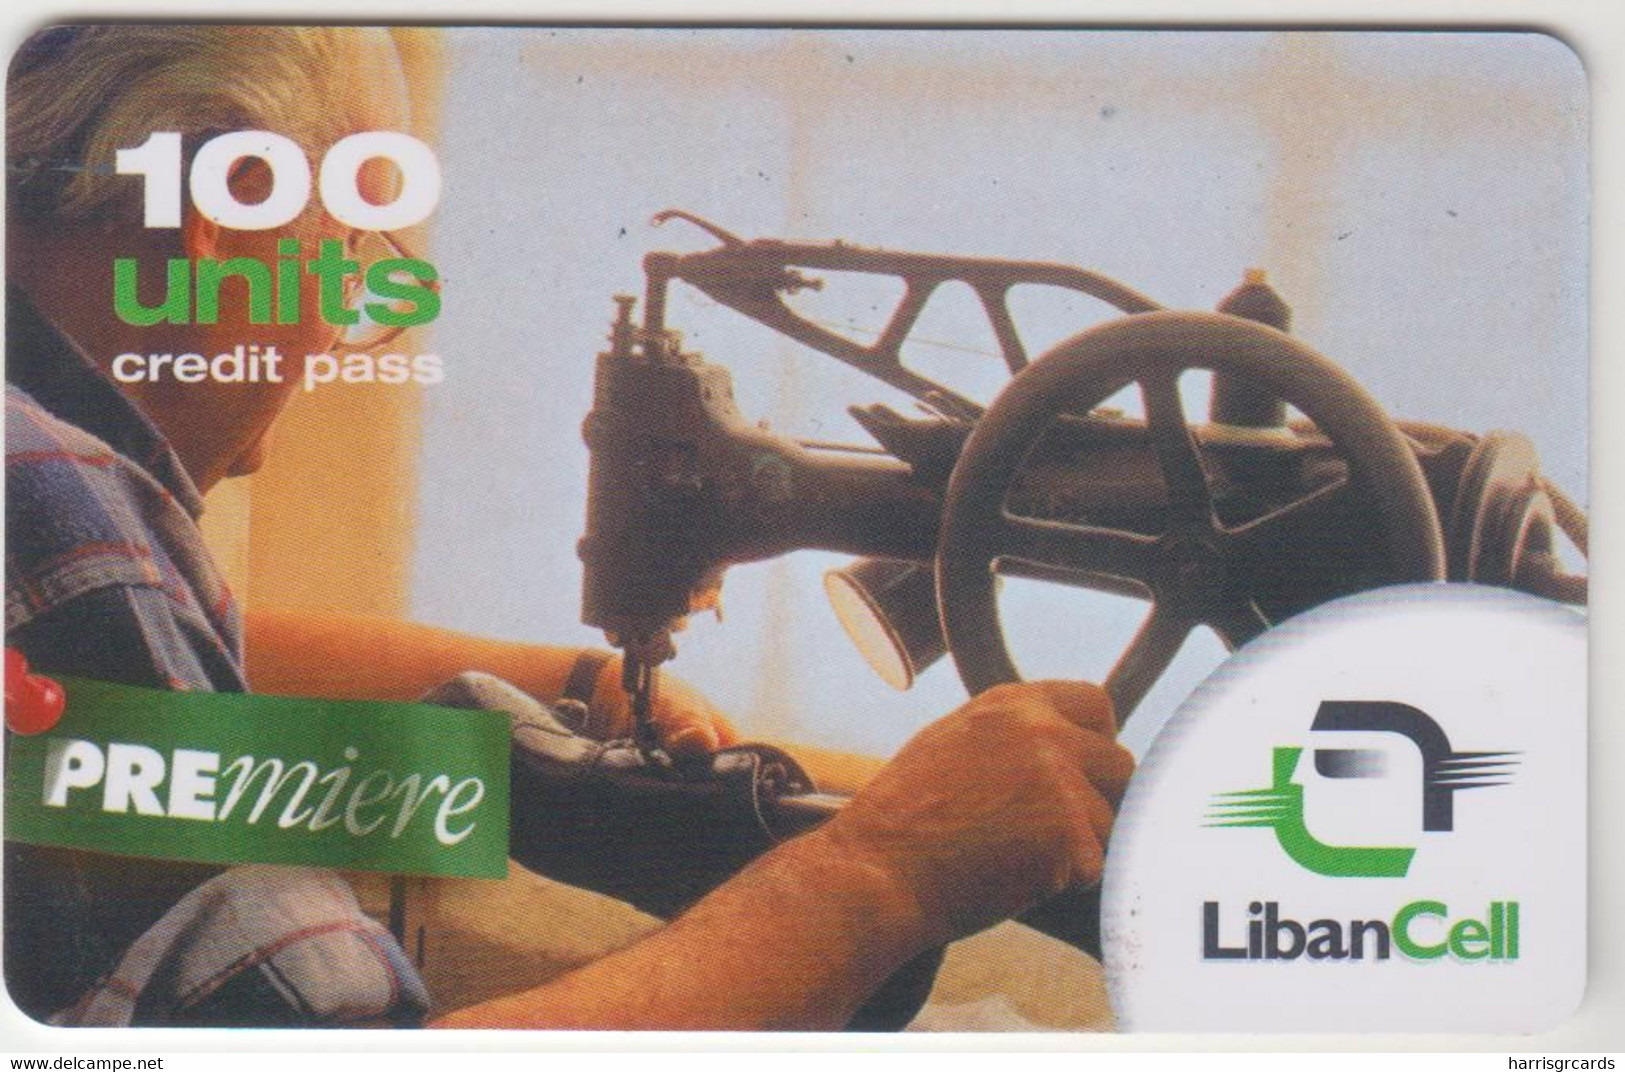 LEBANON - Premiere - Sewing Machine, Libancell Recharge Card 100 Units, Exp.date 23/10/05, Used - Lebanon